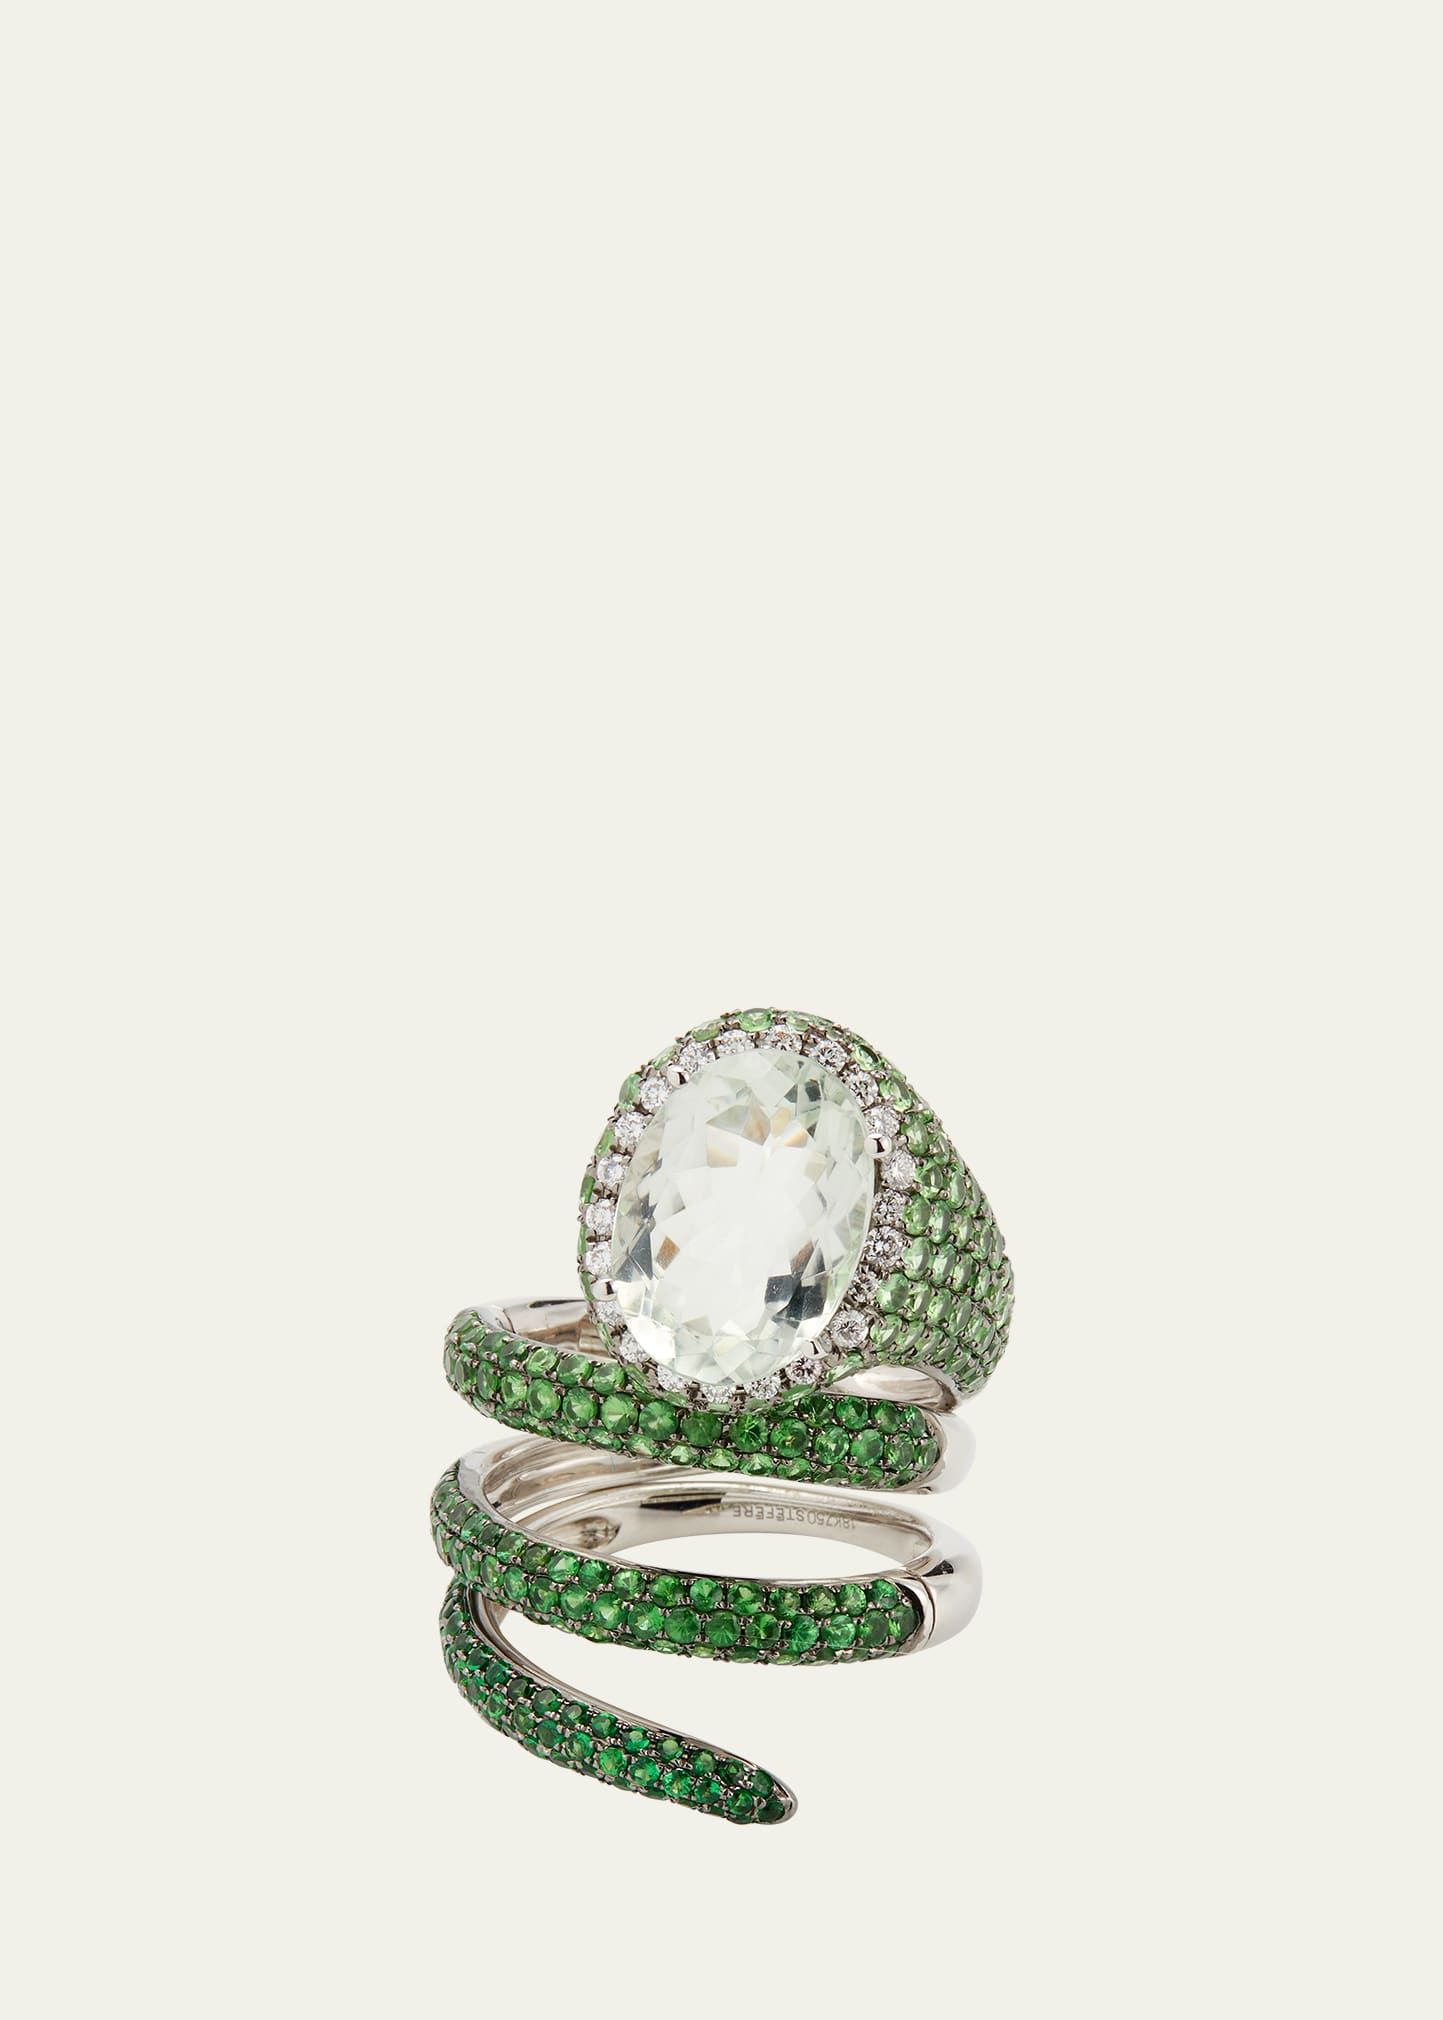 White Gold Green Garnet and Green Amethyst Convertible Ring with Diamond Halo, Size 7